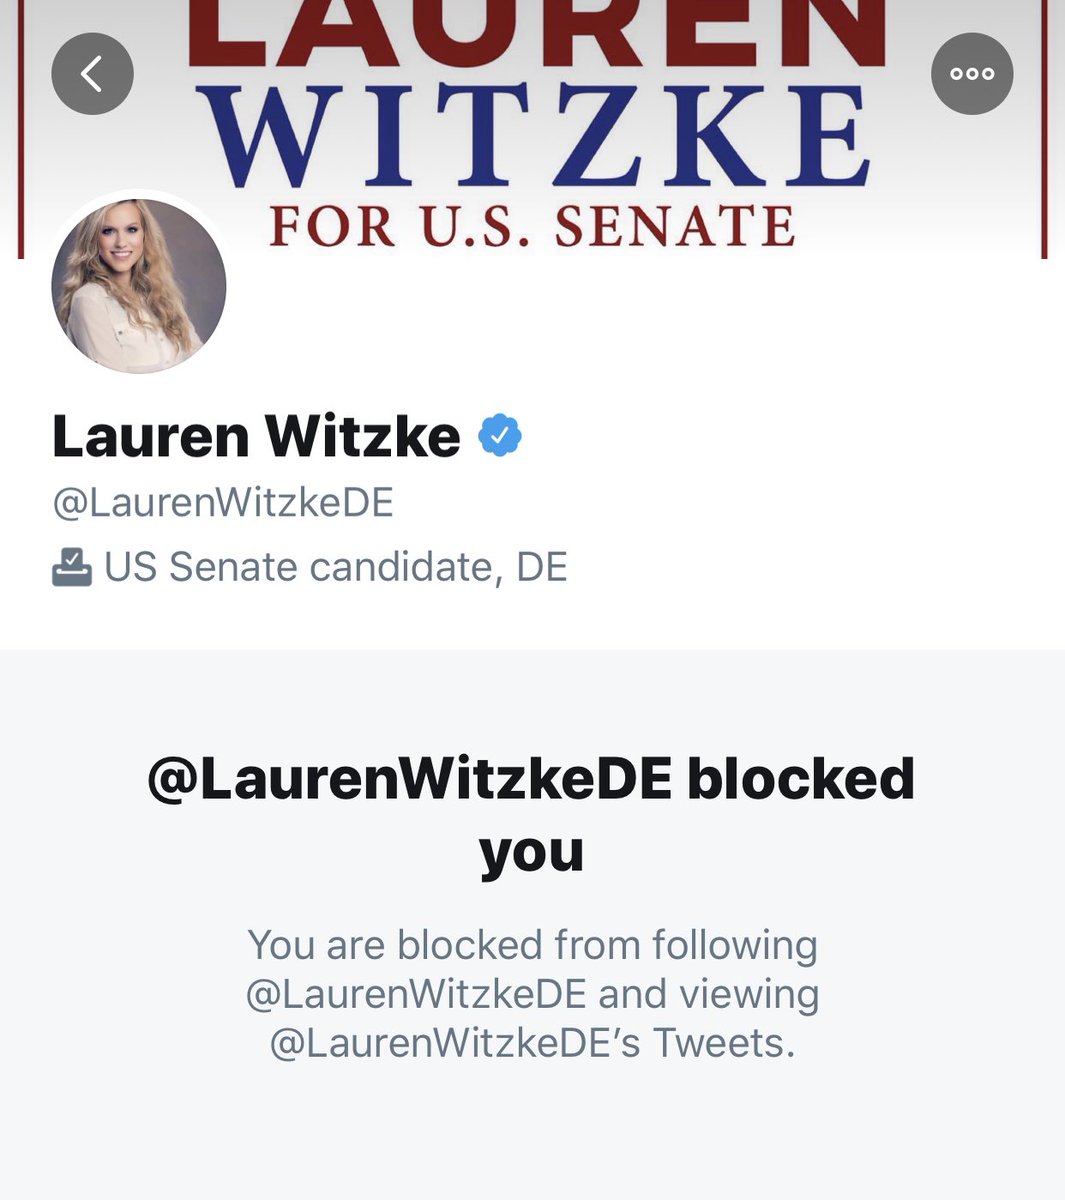 Confirmed. Lauren Witzke doesn’t want you to bring up her use of the N-word and her special trip to see the “Make America White Again” billboard.